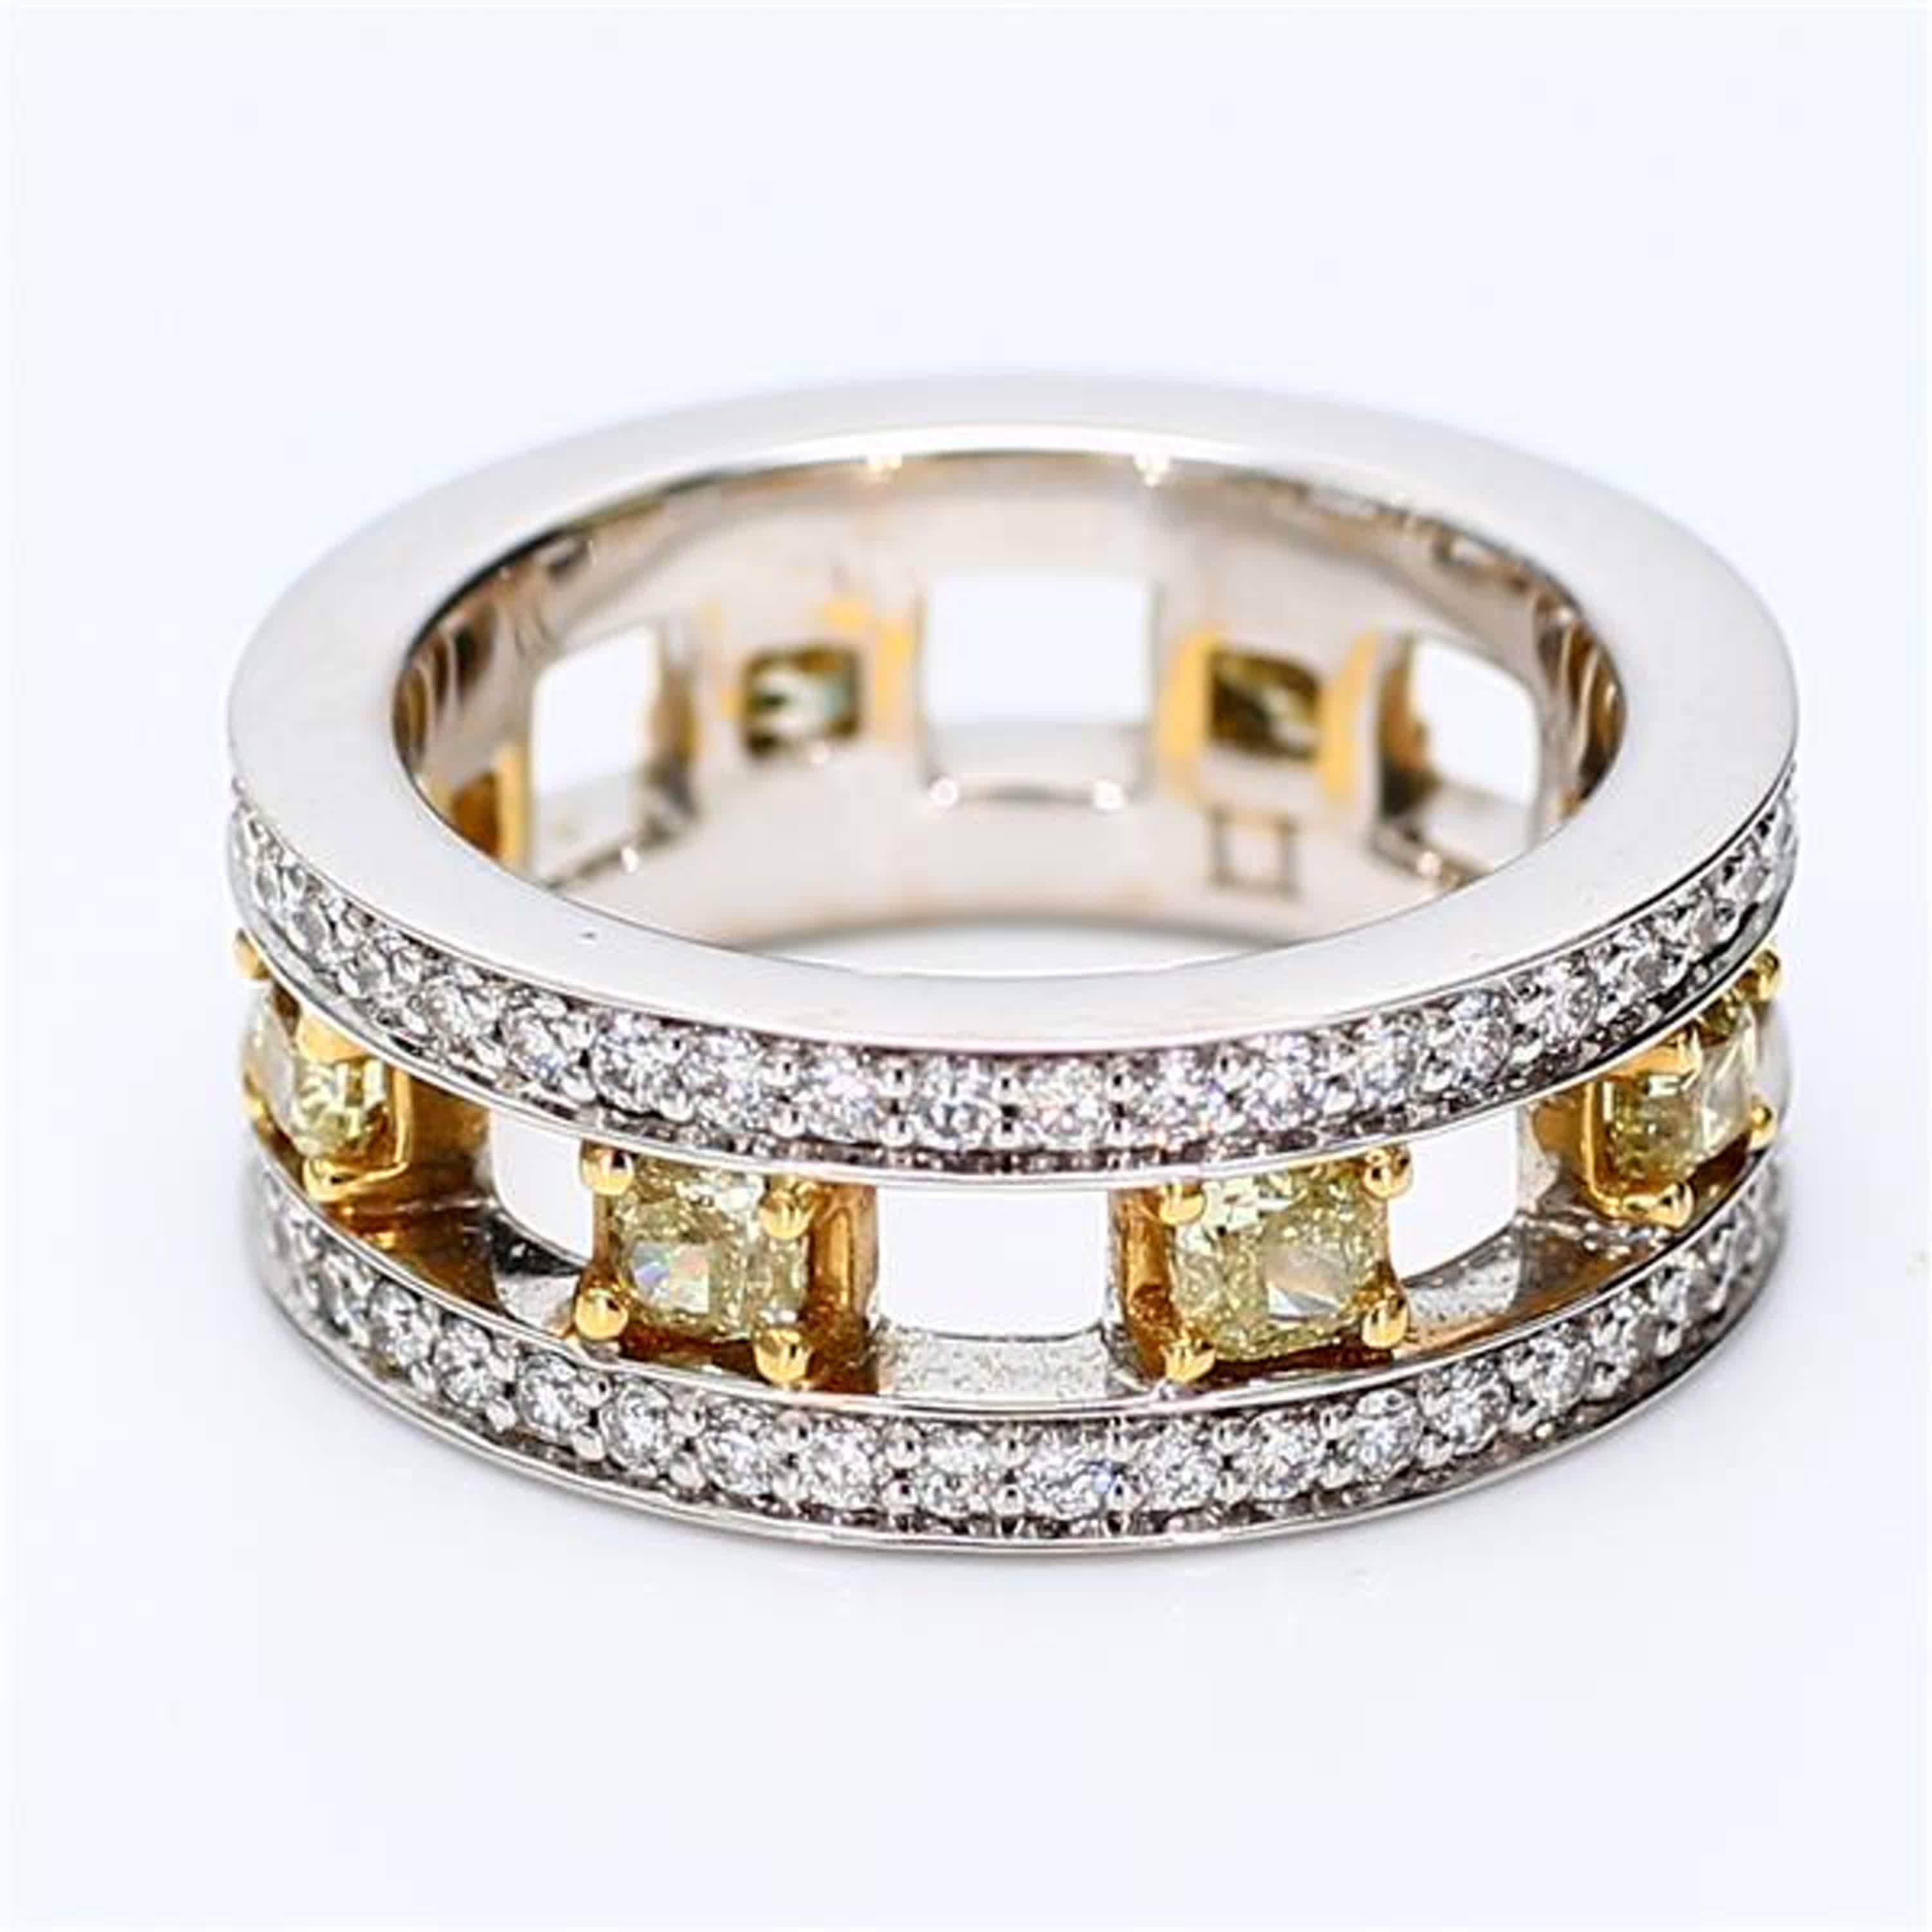 RareGemWorld's classic diamond band. Mounted in a beautiful 18K Yellow and White Gold setting with natural radiant cut yellow diamonds complimented by natural round white diamond melee. This band is guaranteed to impress and enhance your personal